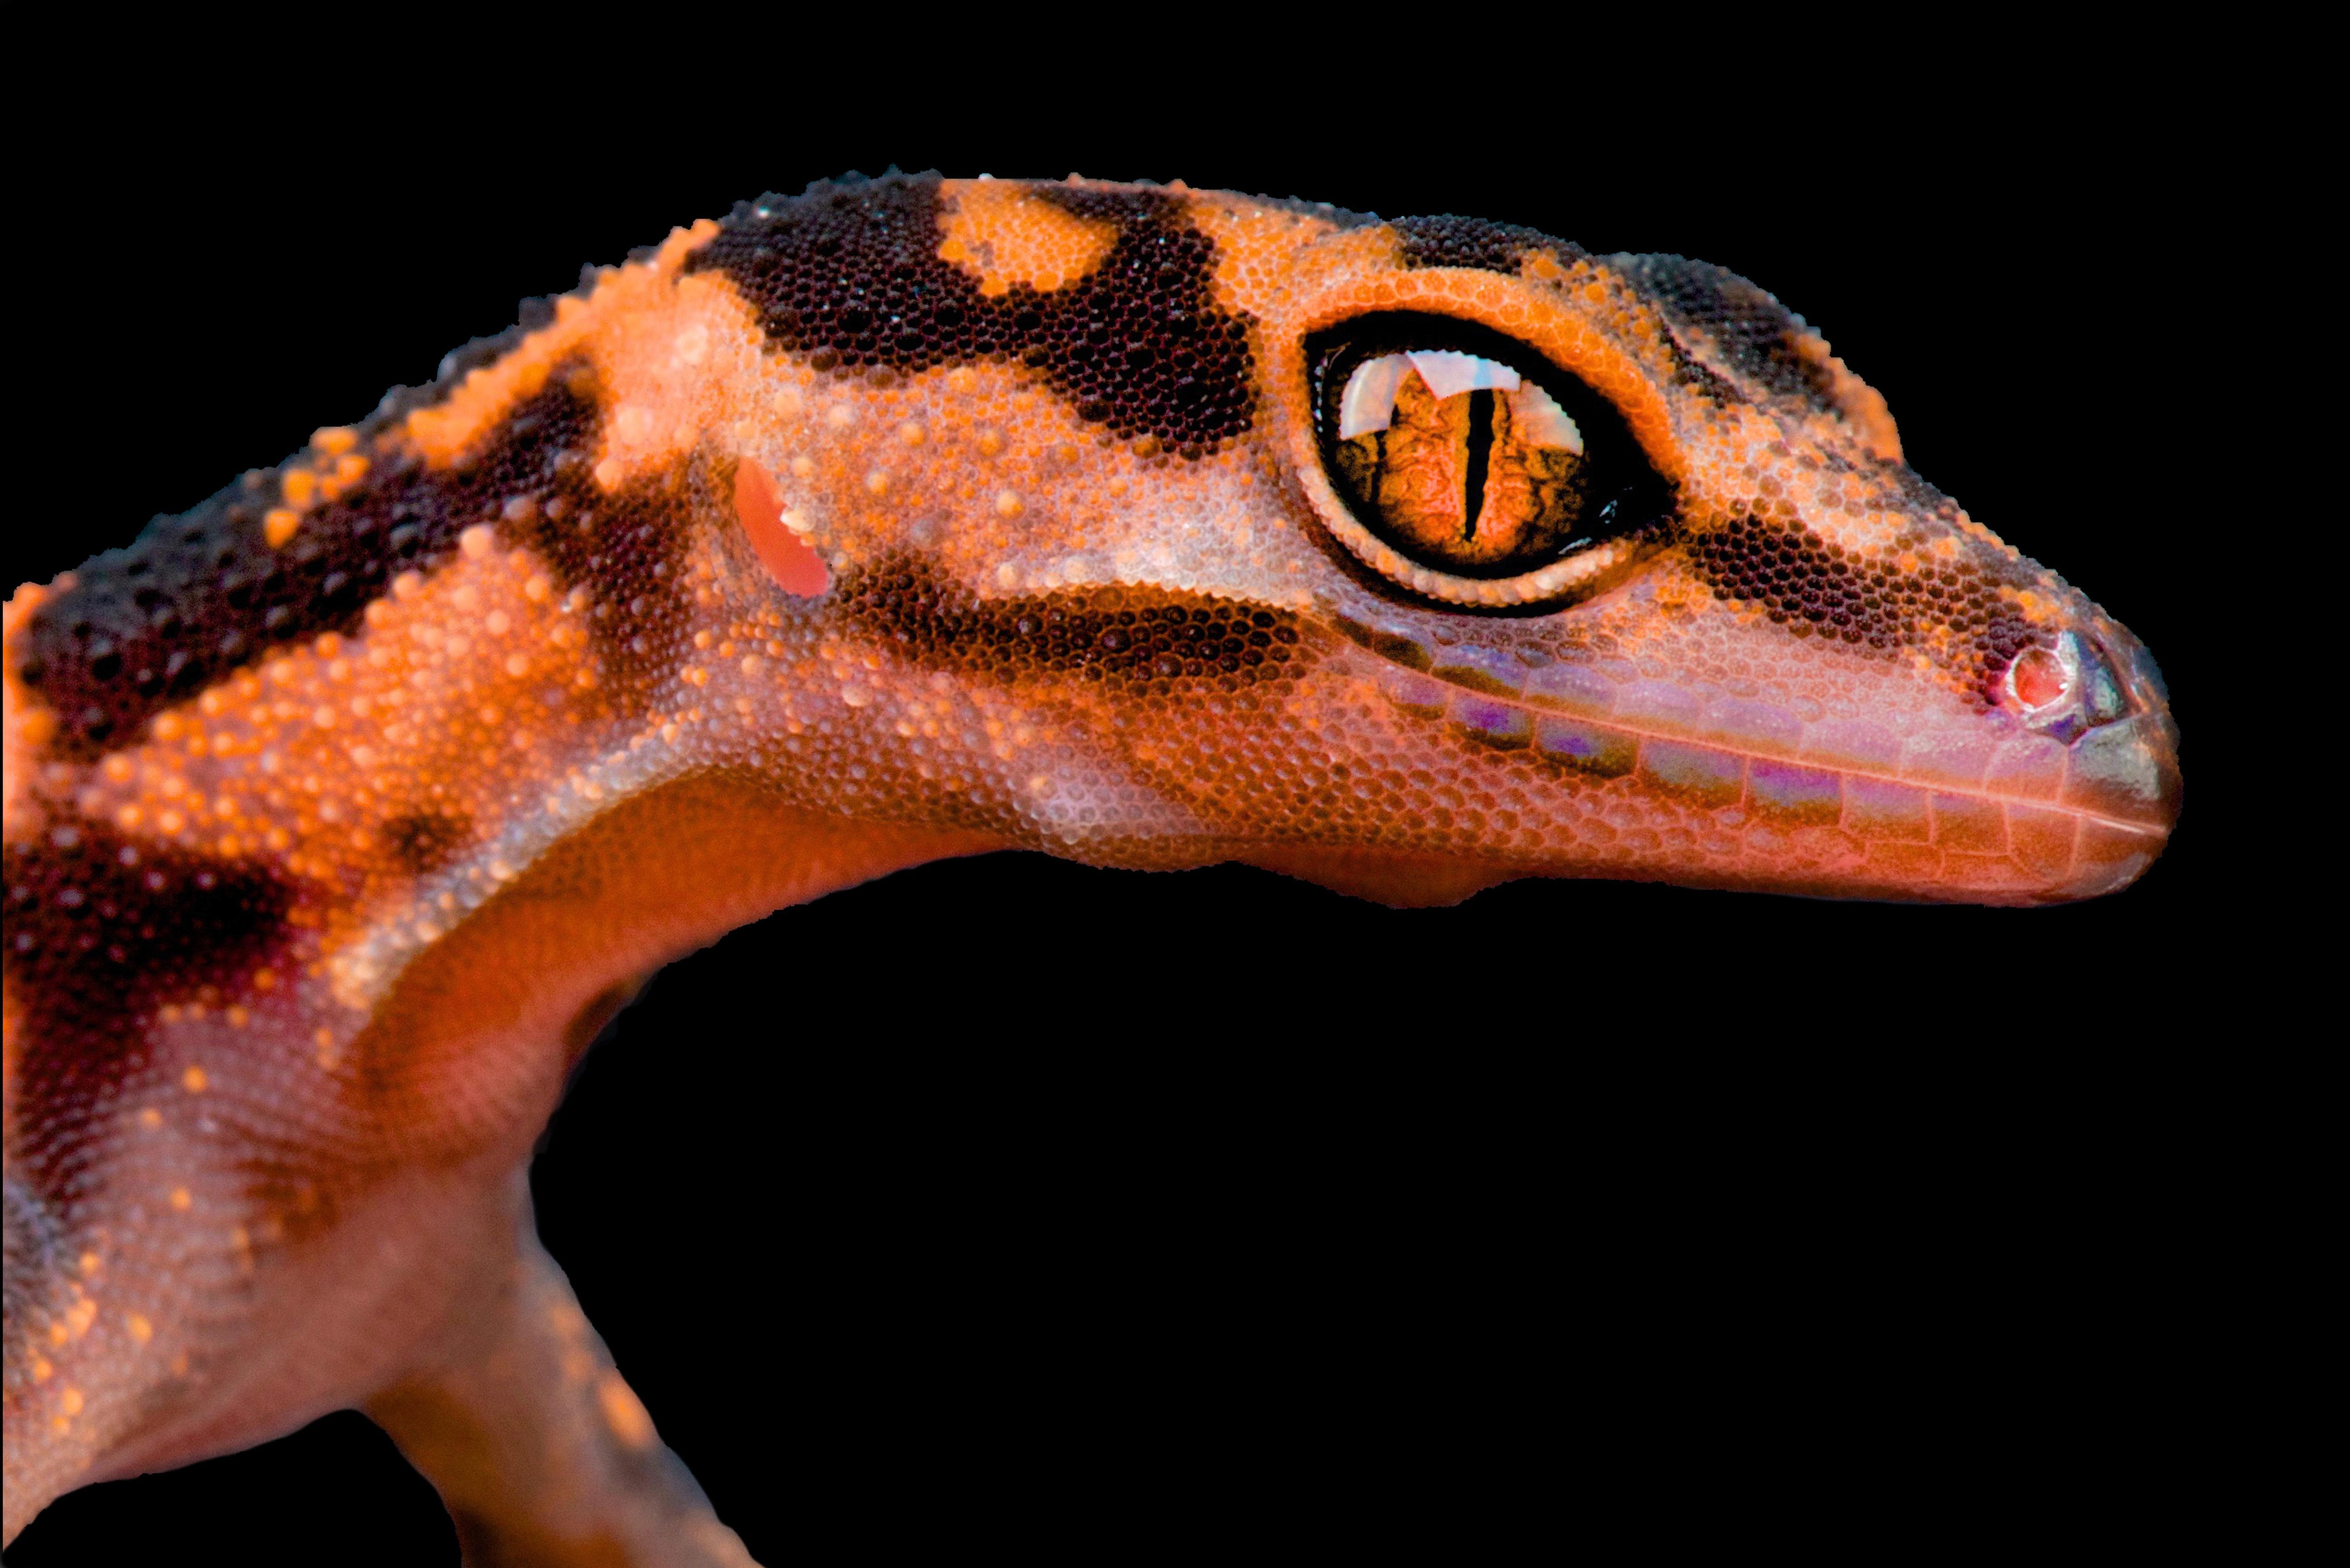 Online Reptile Trade Is a Free-for-All That Threatens Thousands of Species  - Scientific American